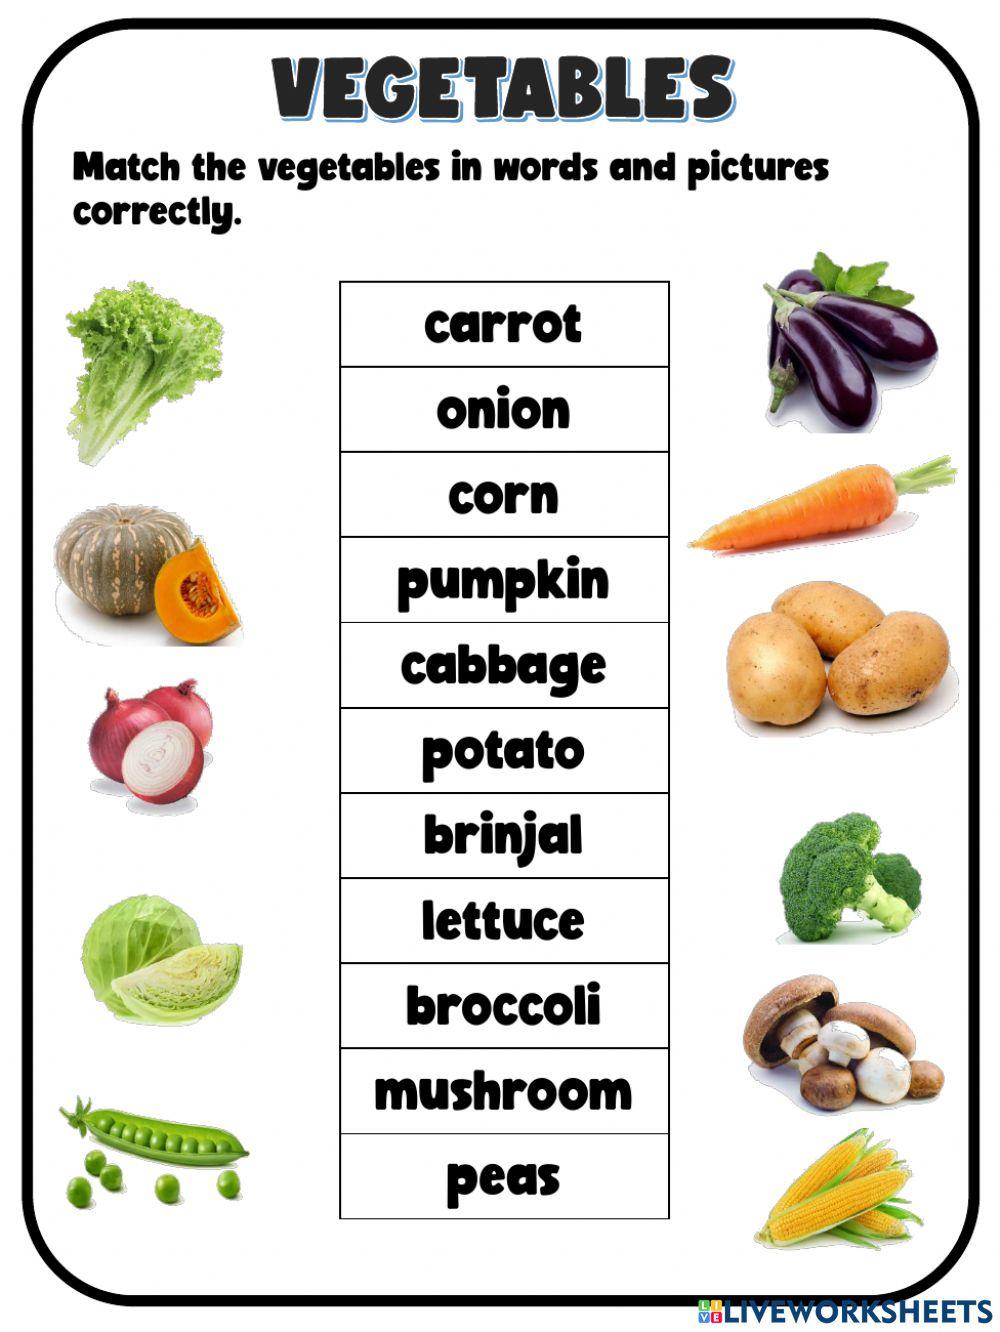 Vegetables matching